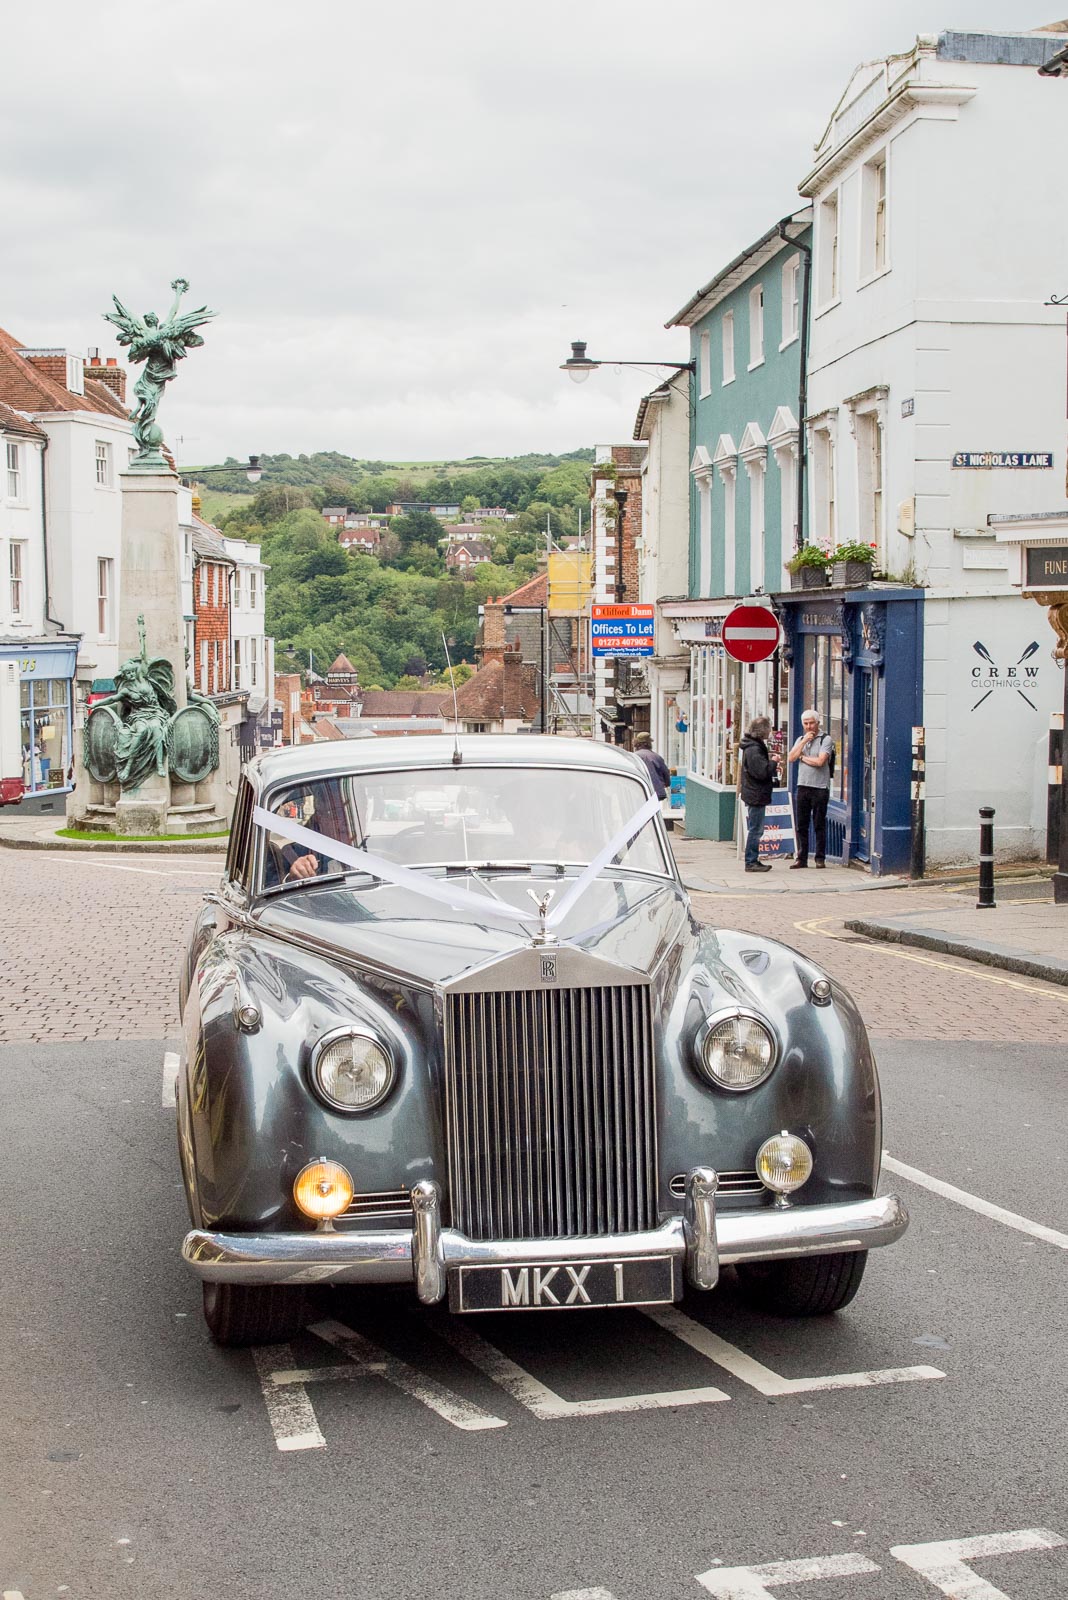 Emily and Richard arrive at Lewes Town Hall for the wedding in a vintage Rolls Royce.